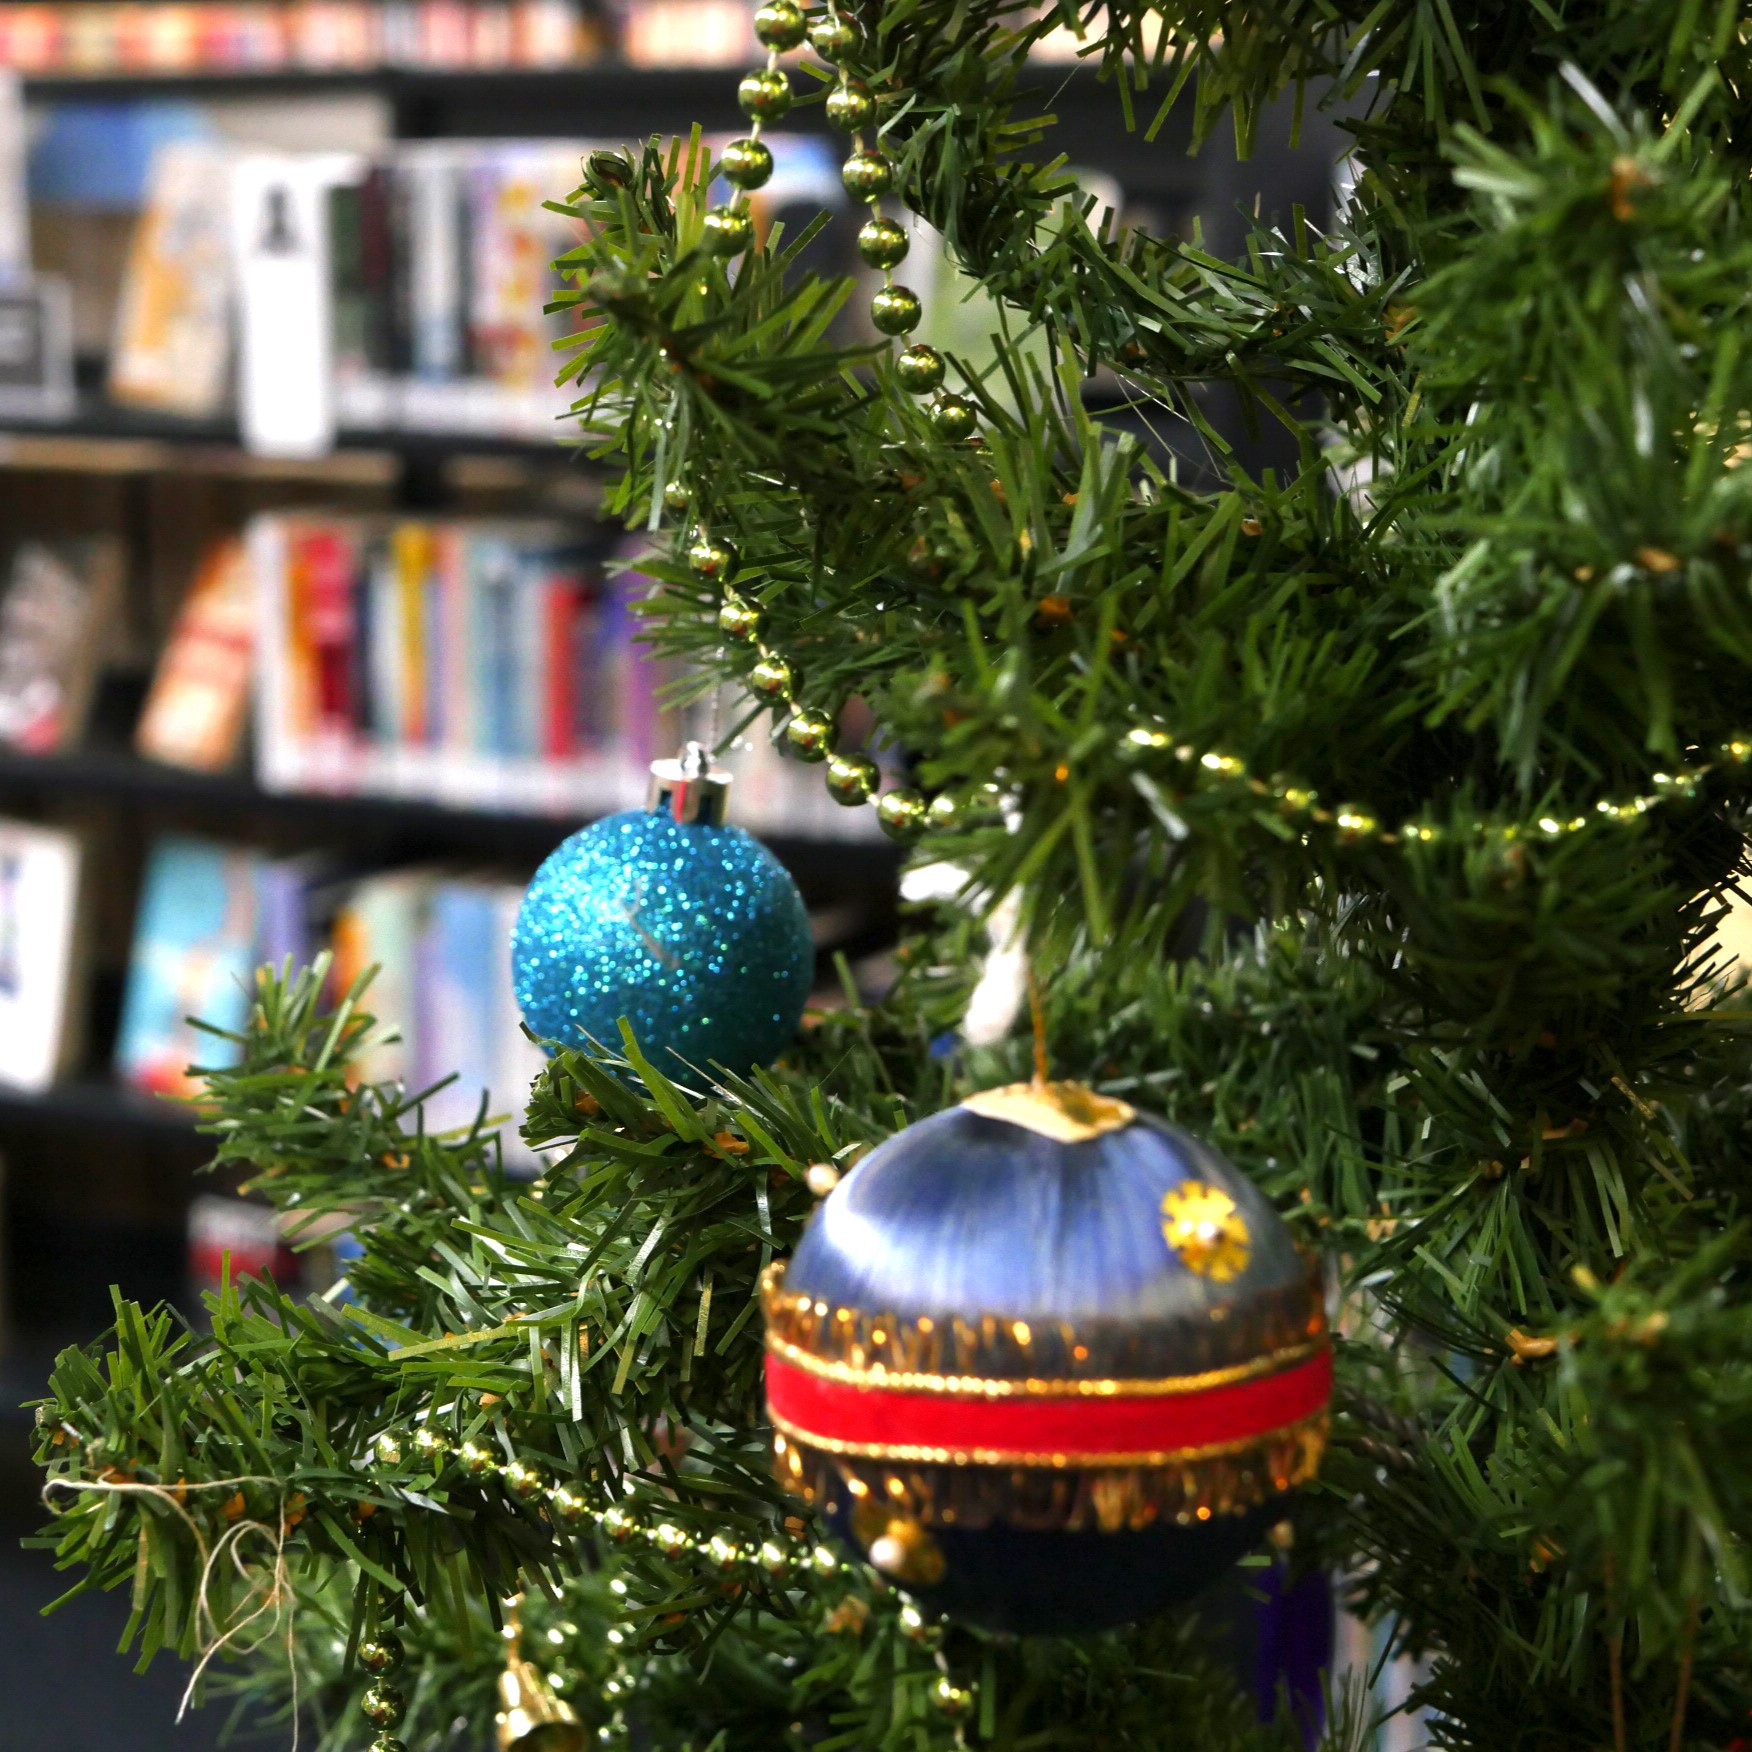 A fake Christmas Tree with blue and purple baubles, with library shelves in the background.  